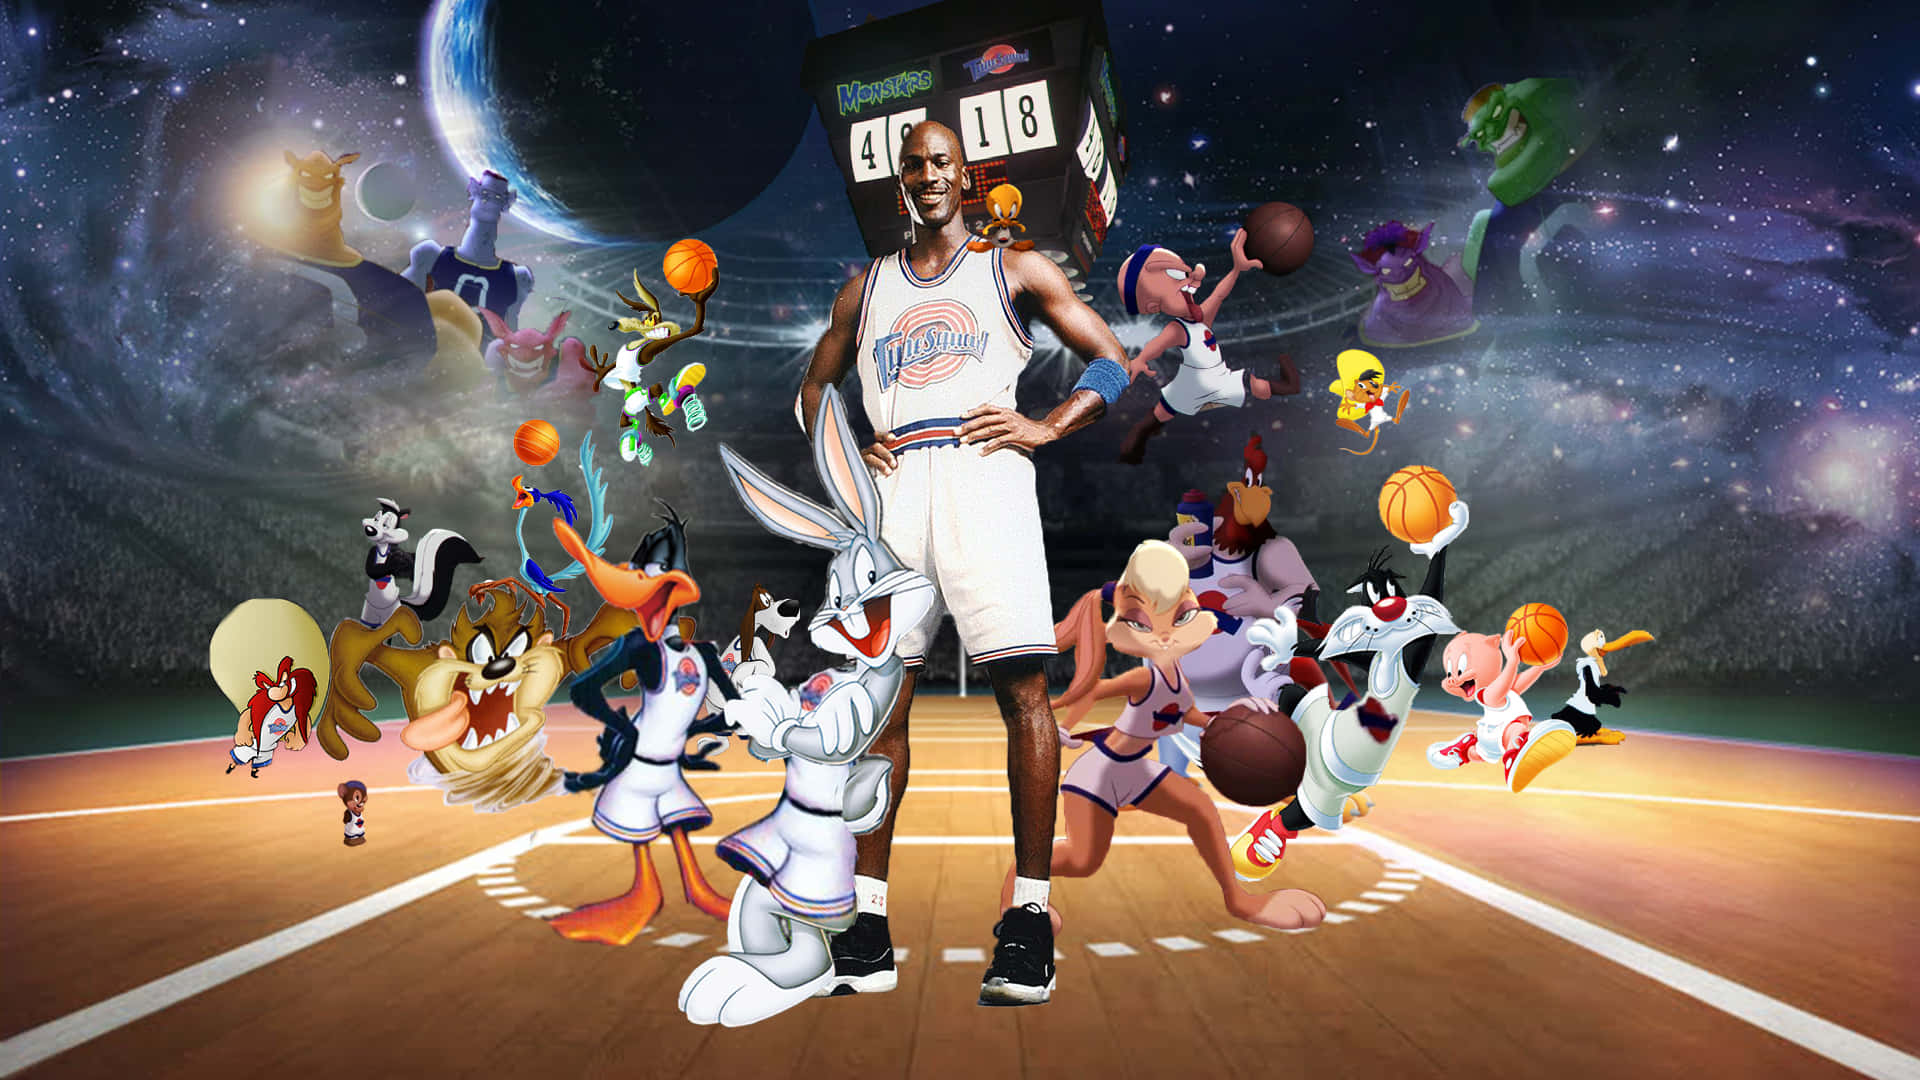 100+] Cool Space Jam Backgrounds